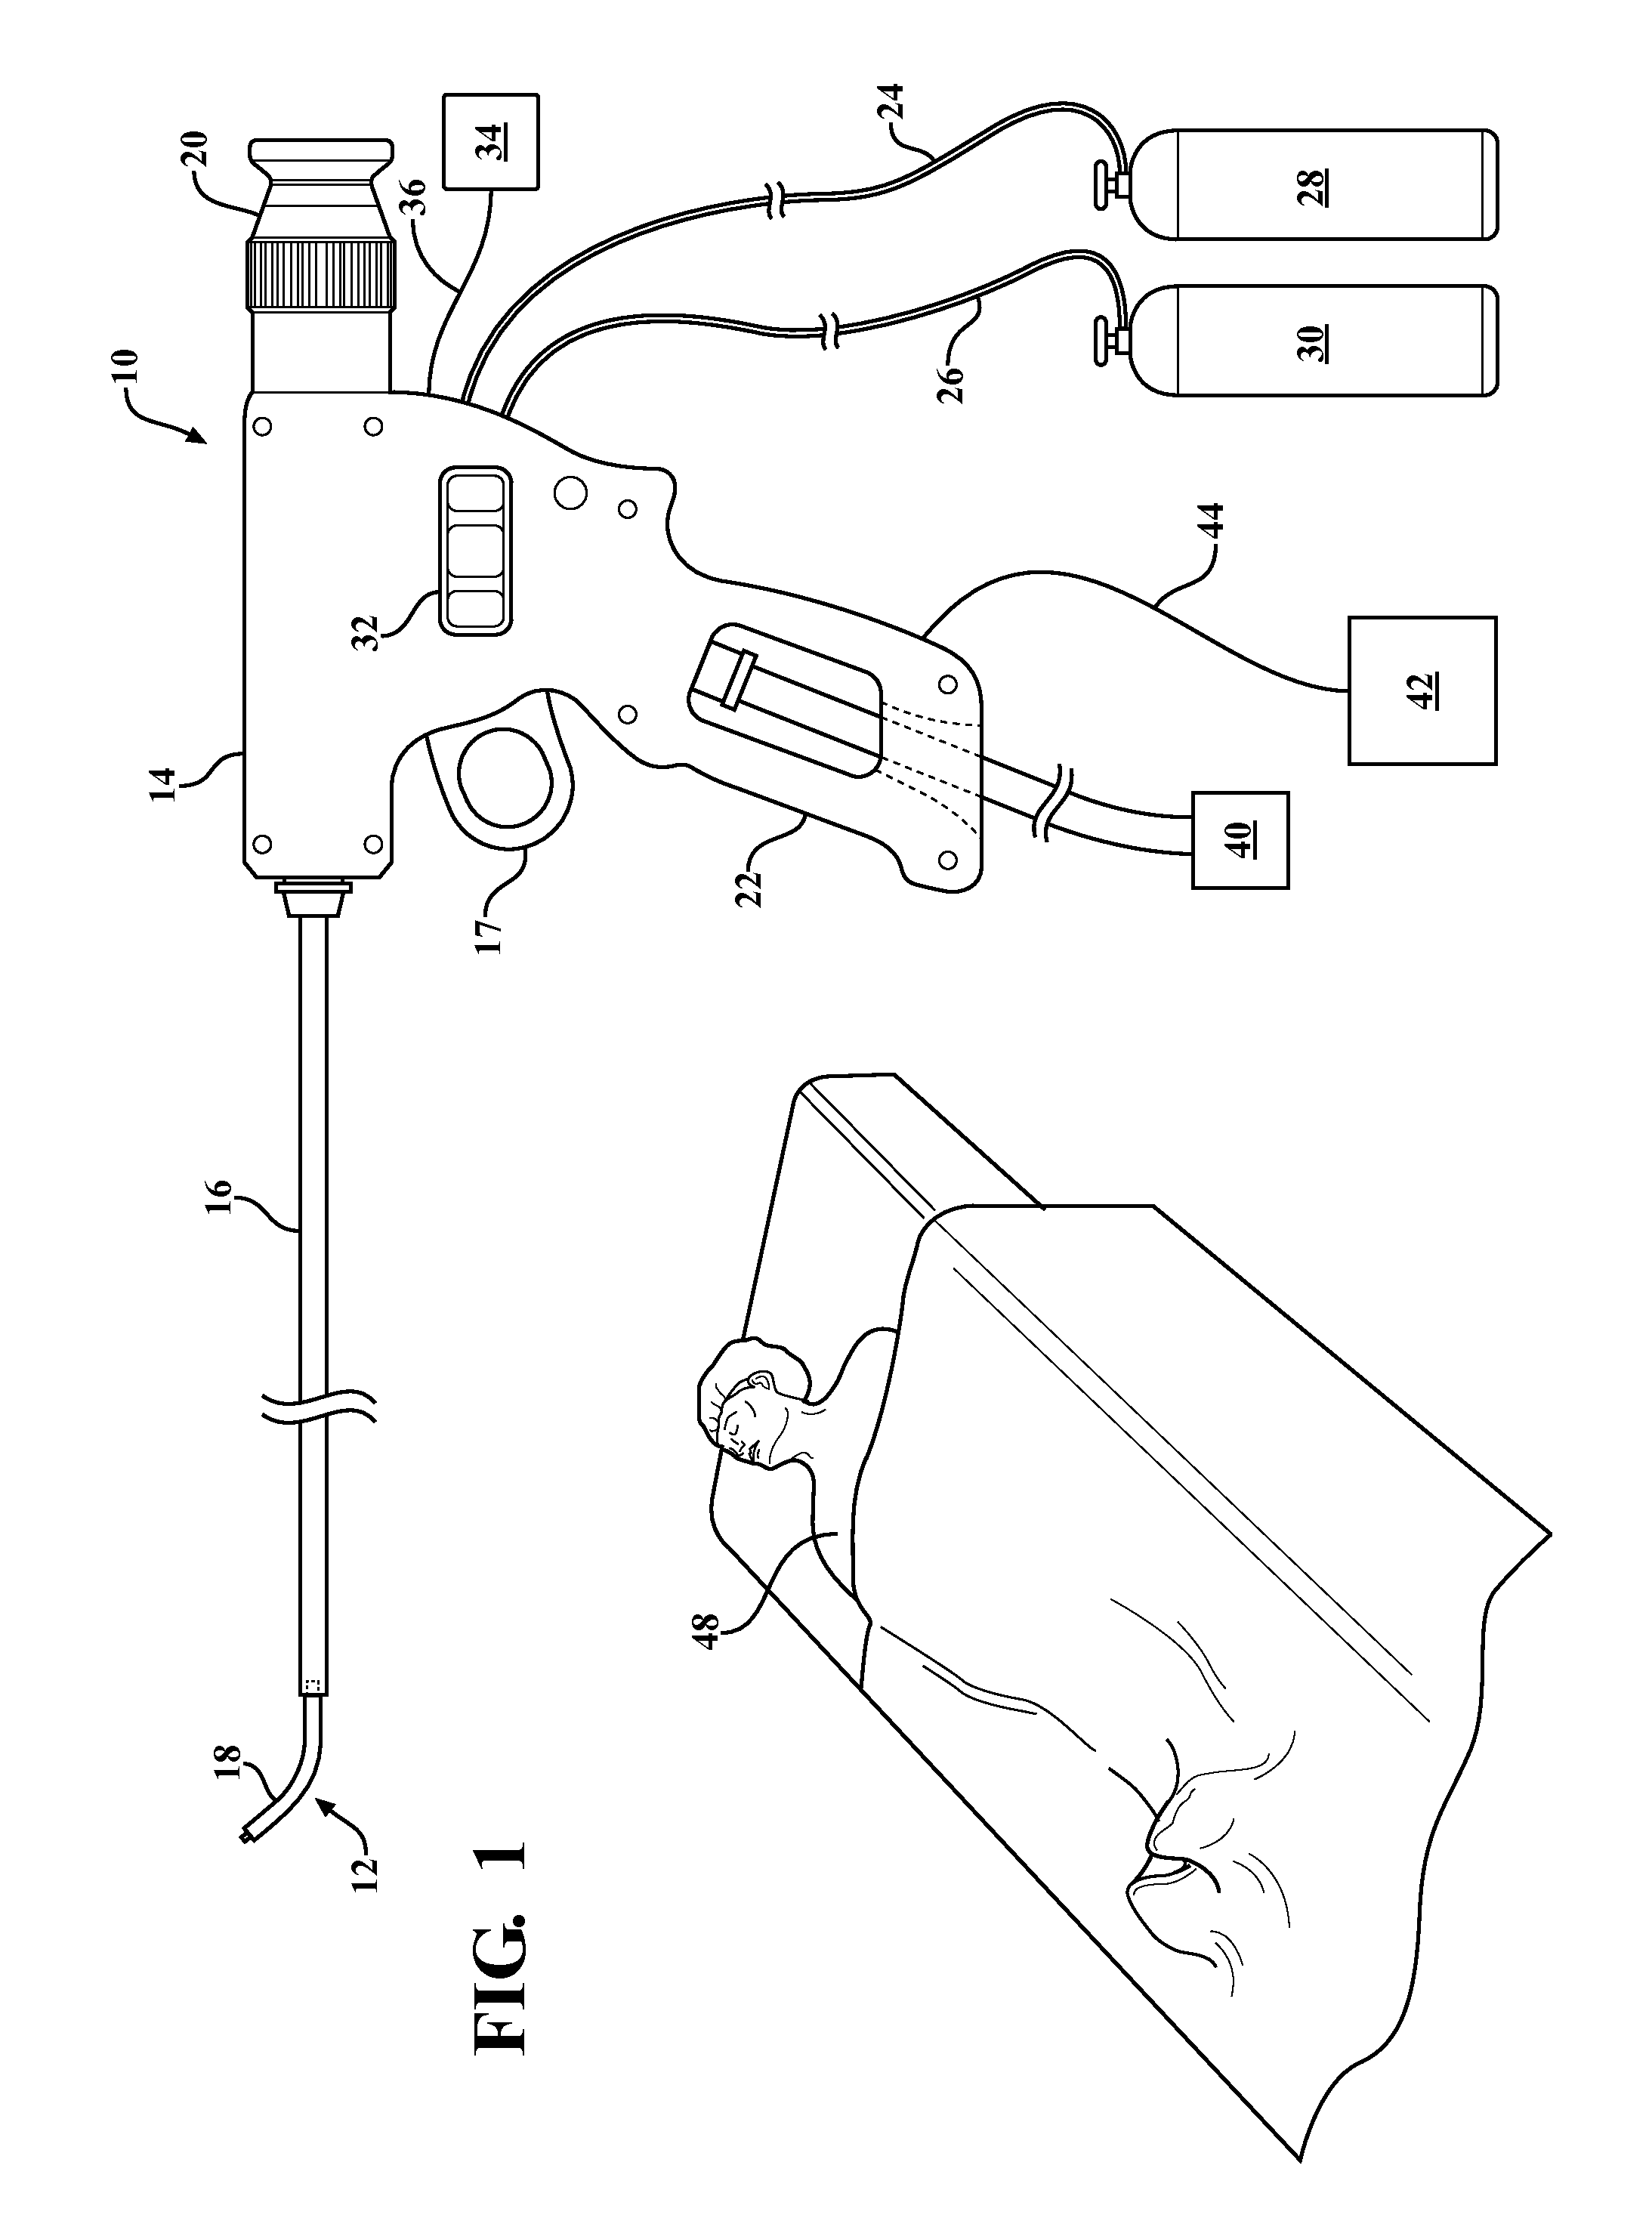 Method and apparatus for cold plasma treatment of internal organs